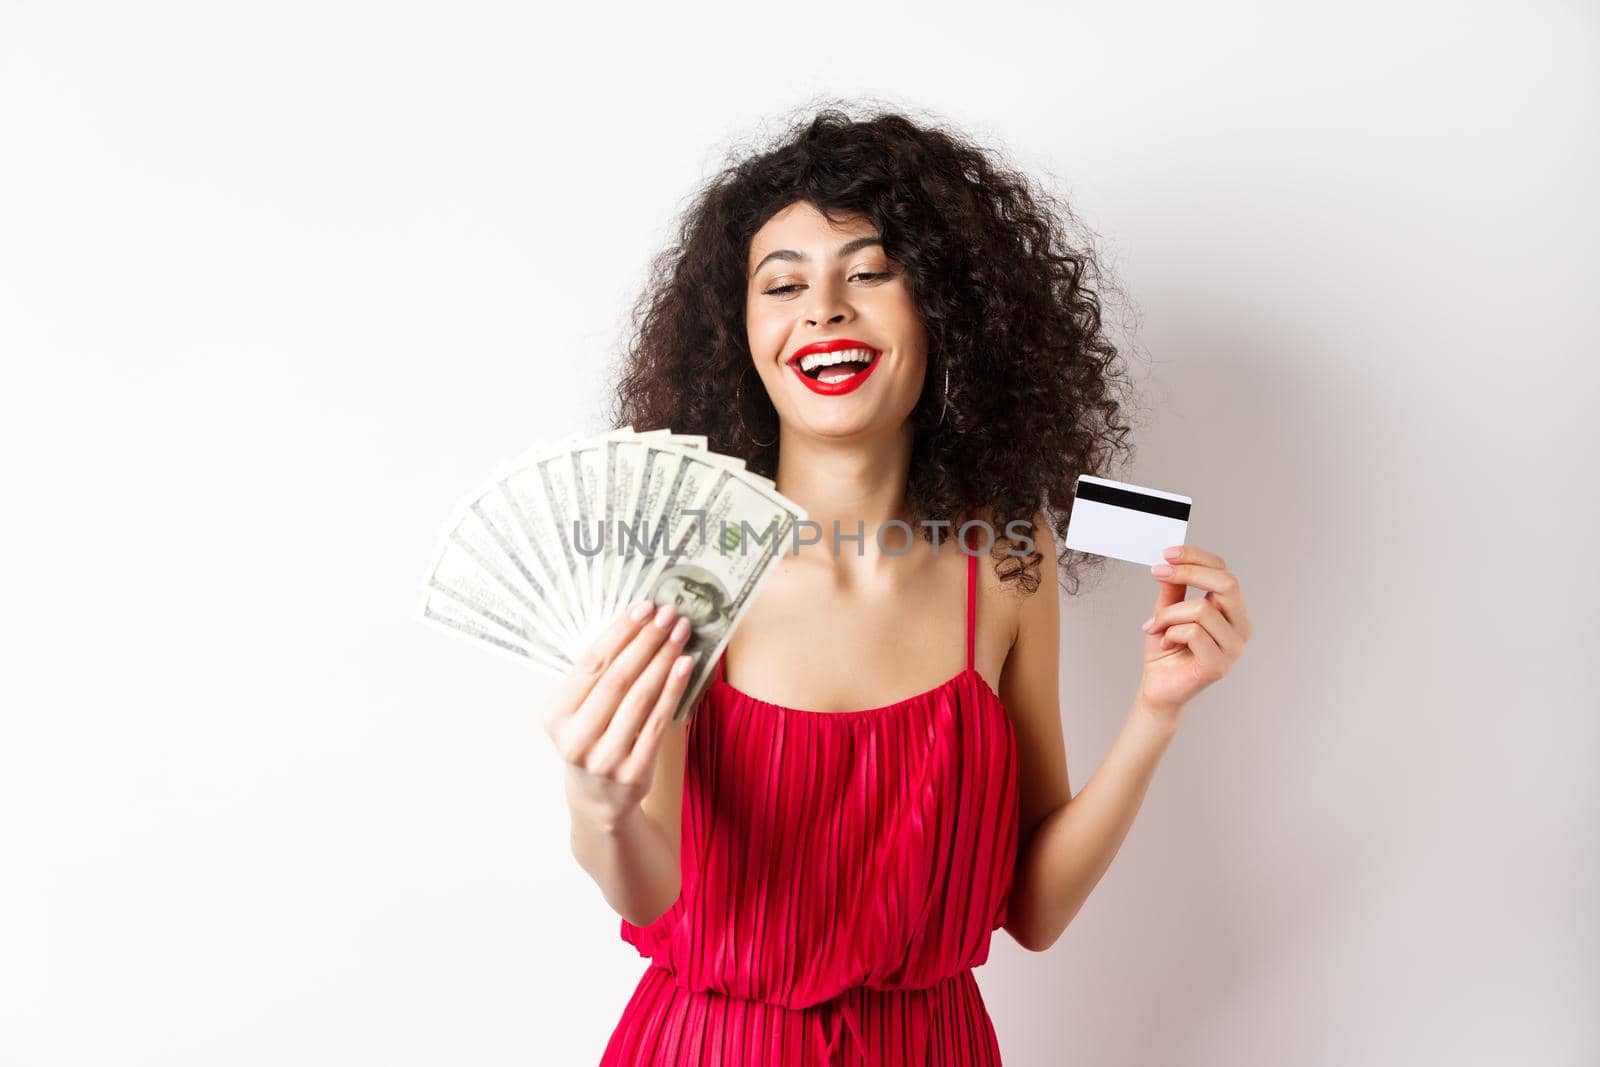 Shopping. Rich successful woman with curly hair and red dress, holding plastic credit card and looking pleased at dollar bills, white background.